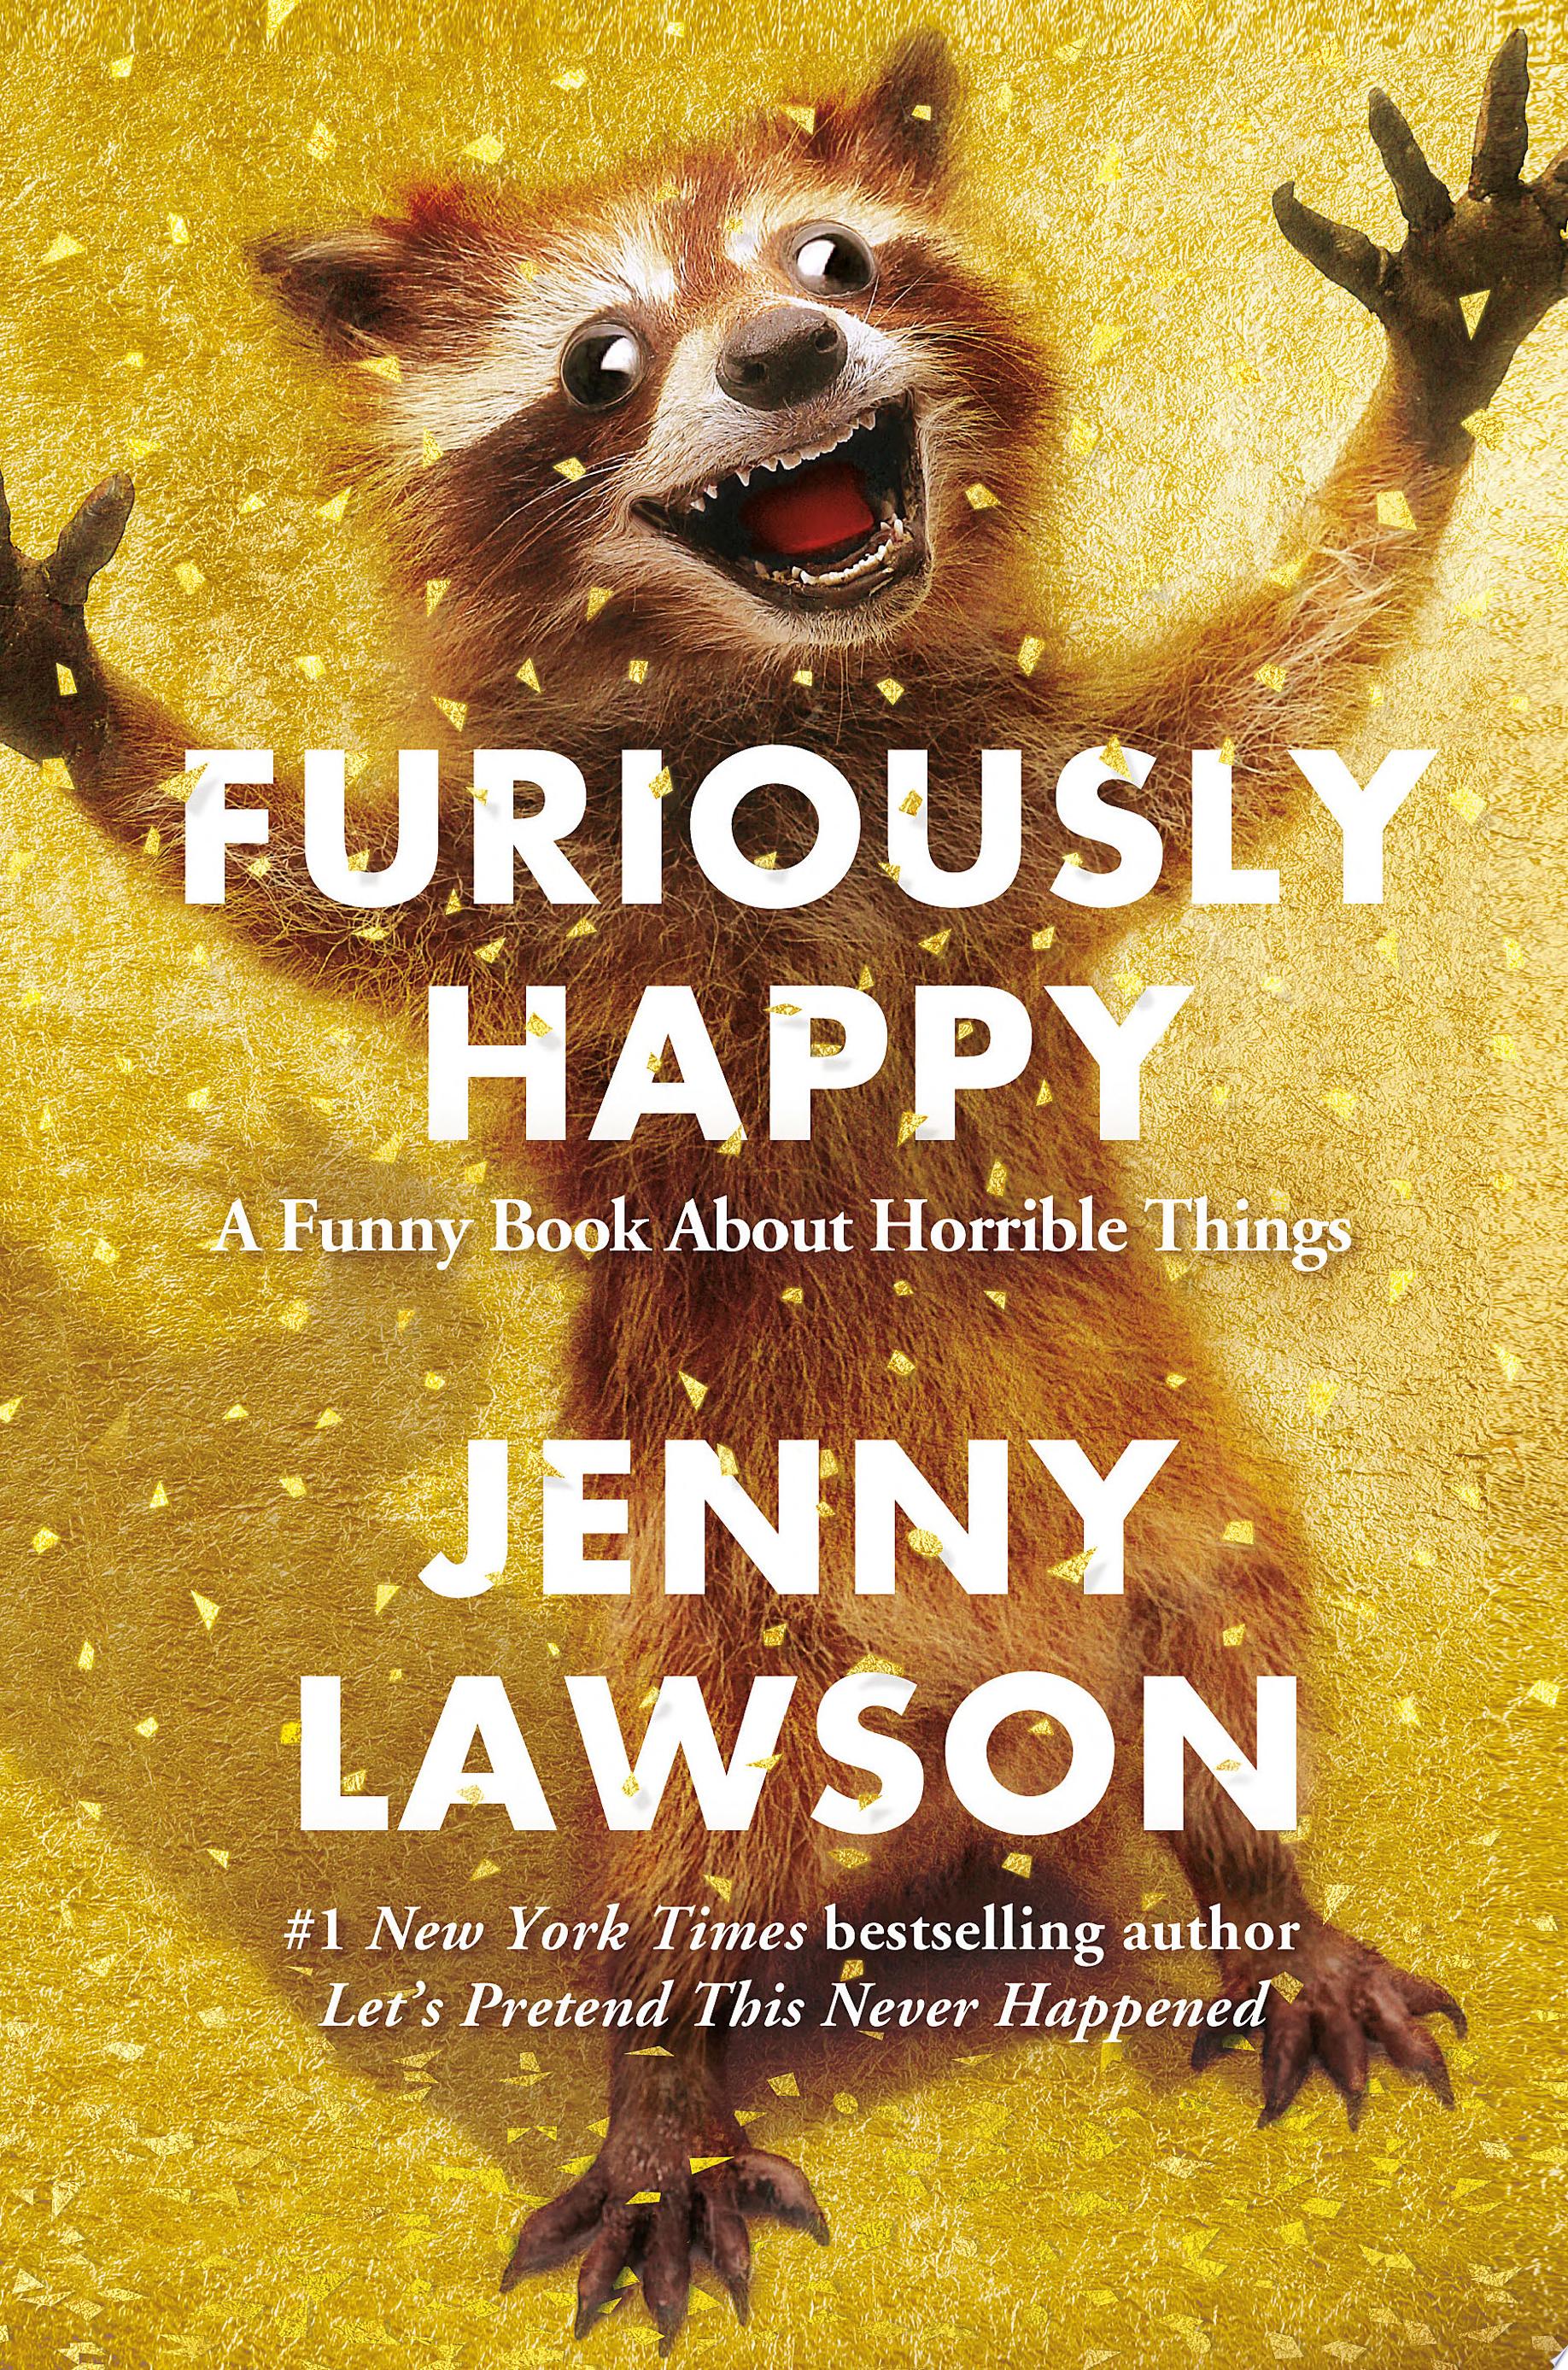 Image for "Furiously Happy: a funny book about horrible things"